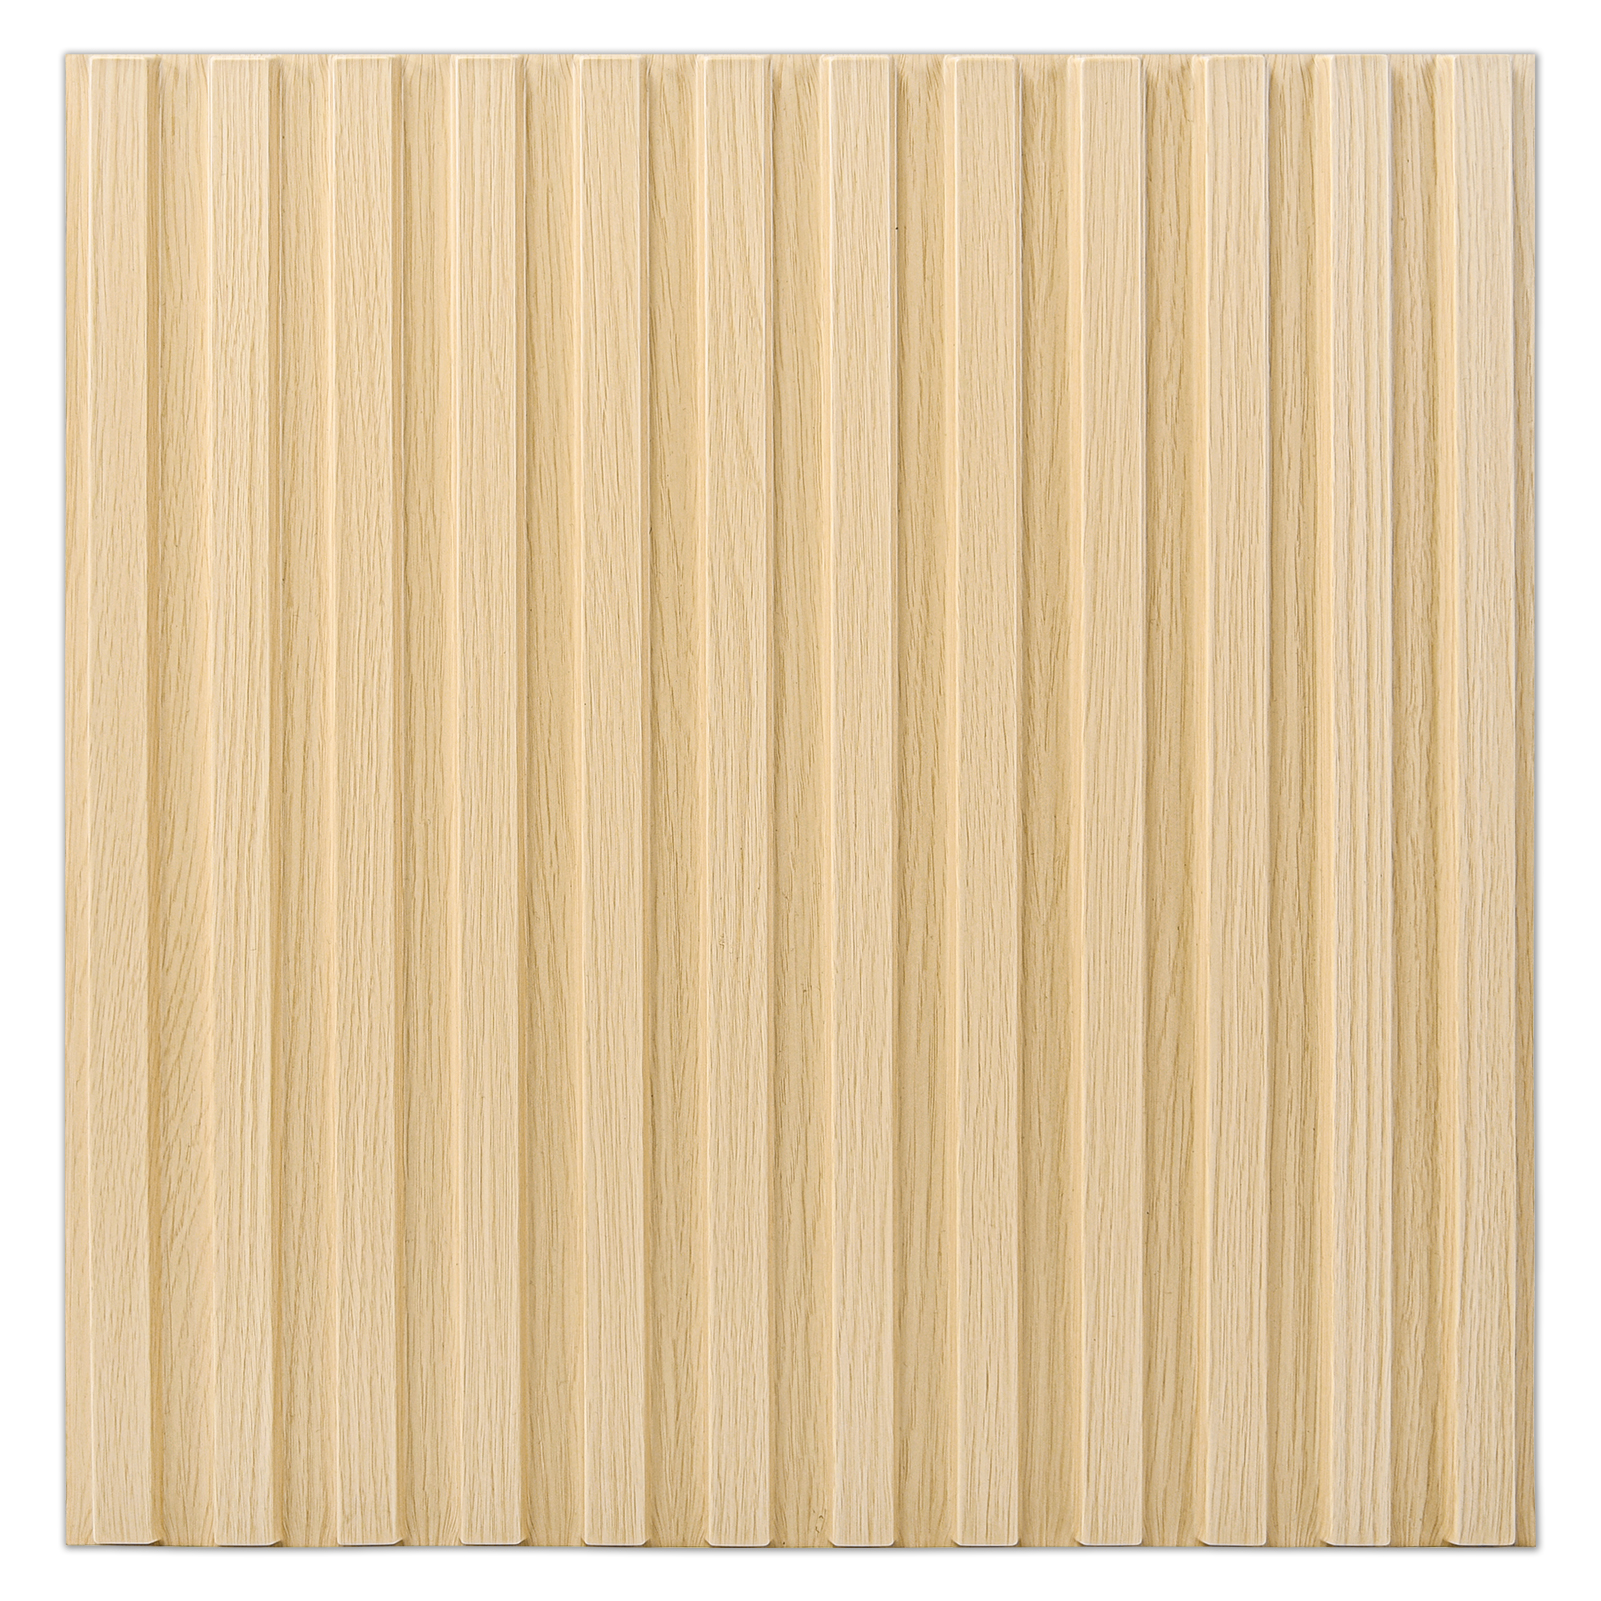 A10064OK-Art3d Slat Wall Panel, 3D Fluted Textured Panel 12-Tile 19.7 x 19.7in.